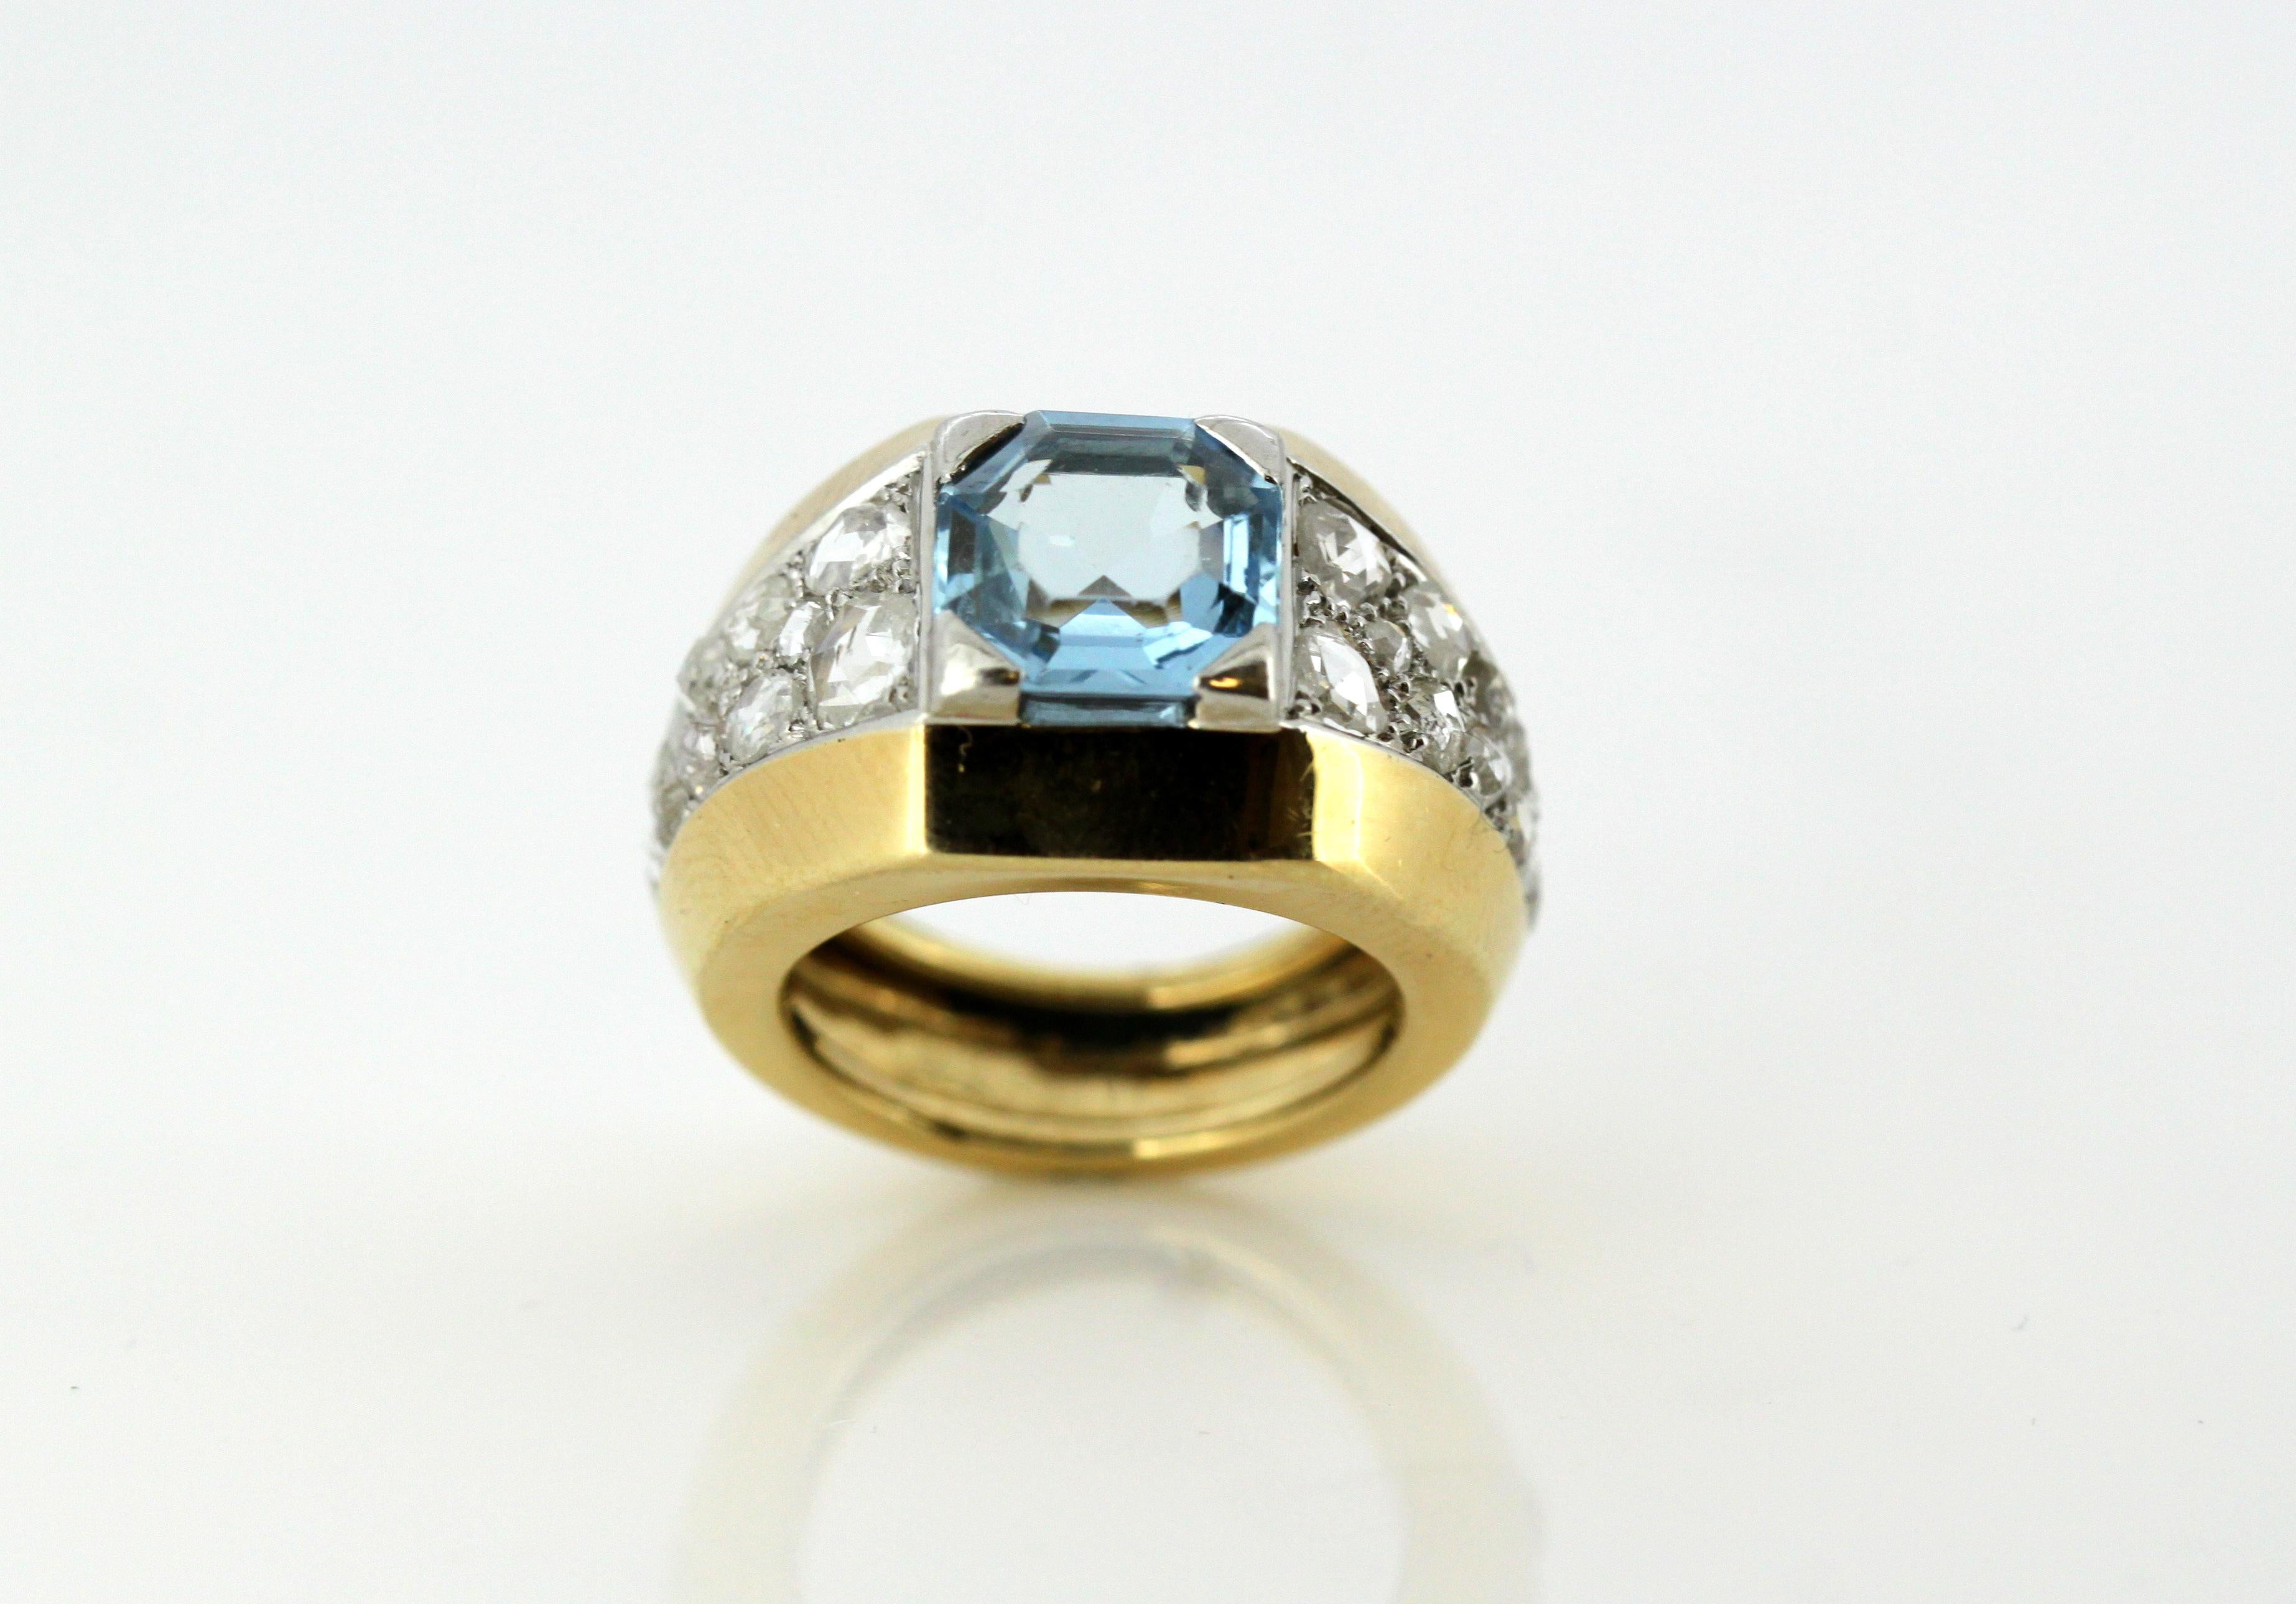 18kt yellow gold ladies ring with natural aquamarine and rose cut diamonds.
Hallmark on outer ring band is worn off.
Circa 1940's

Dimensions -
Finger Size : (UK) = I (US) = 4 3/4 (EU) = 47 3/4
Size : 2.5 x 2.3 x 1.4 cm
Weight: 10 grams